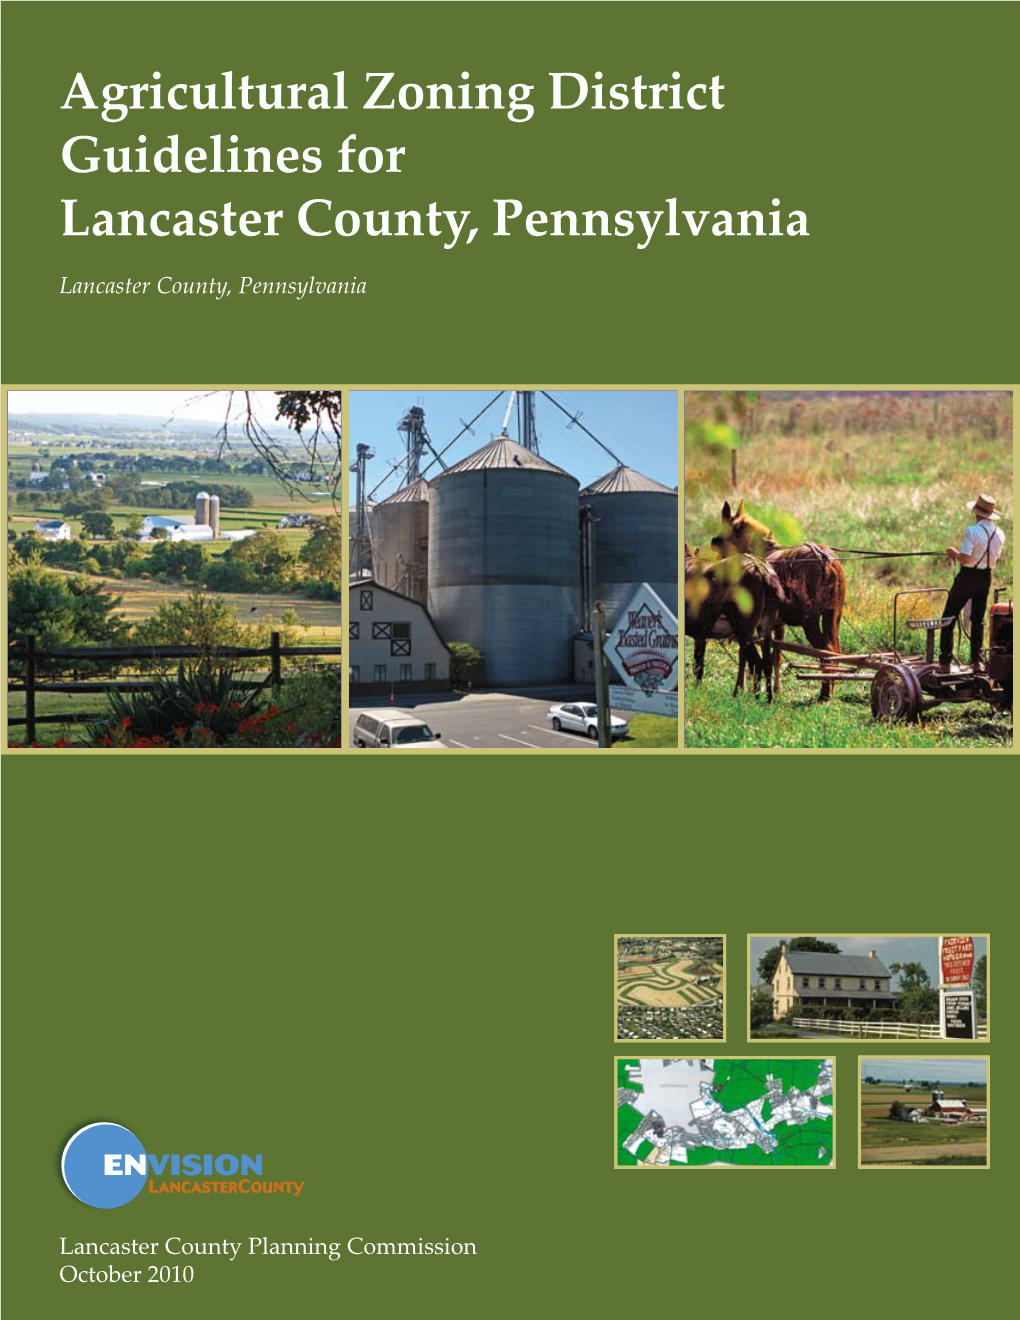 Agricultural Zoning District Guidelines for Lancaster County, Pennsylvania